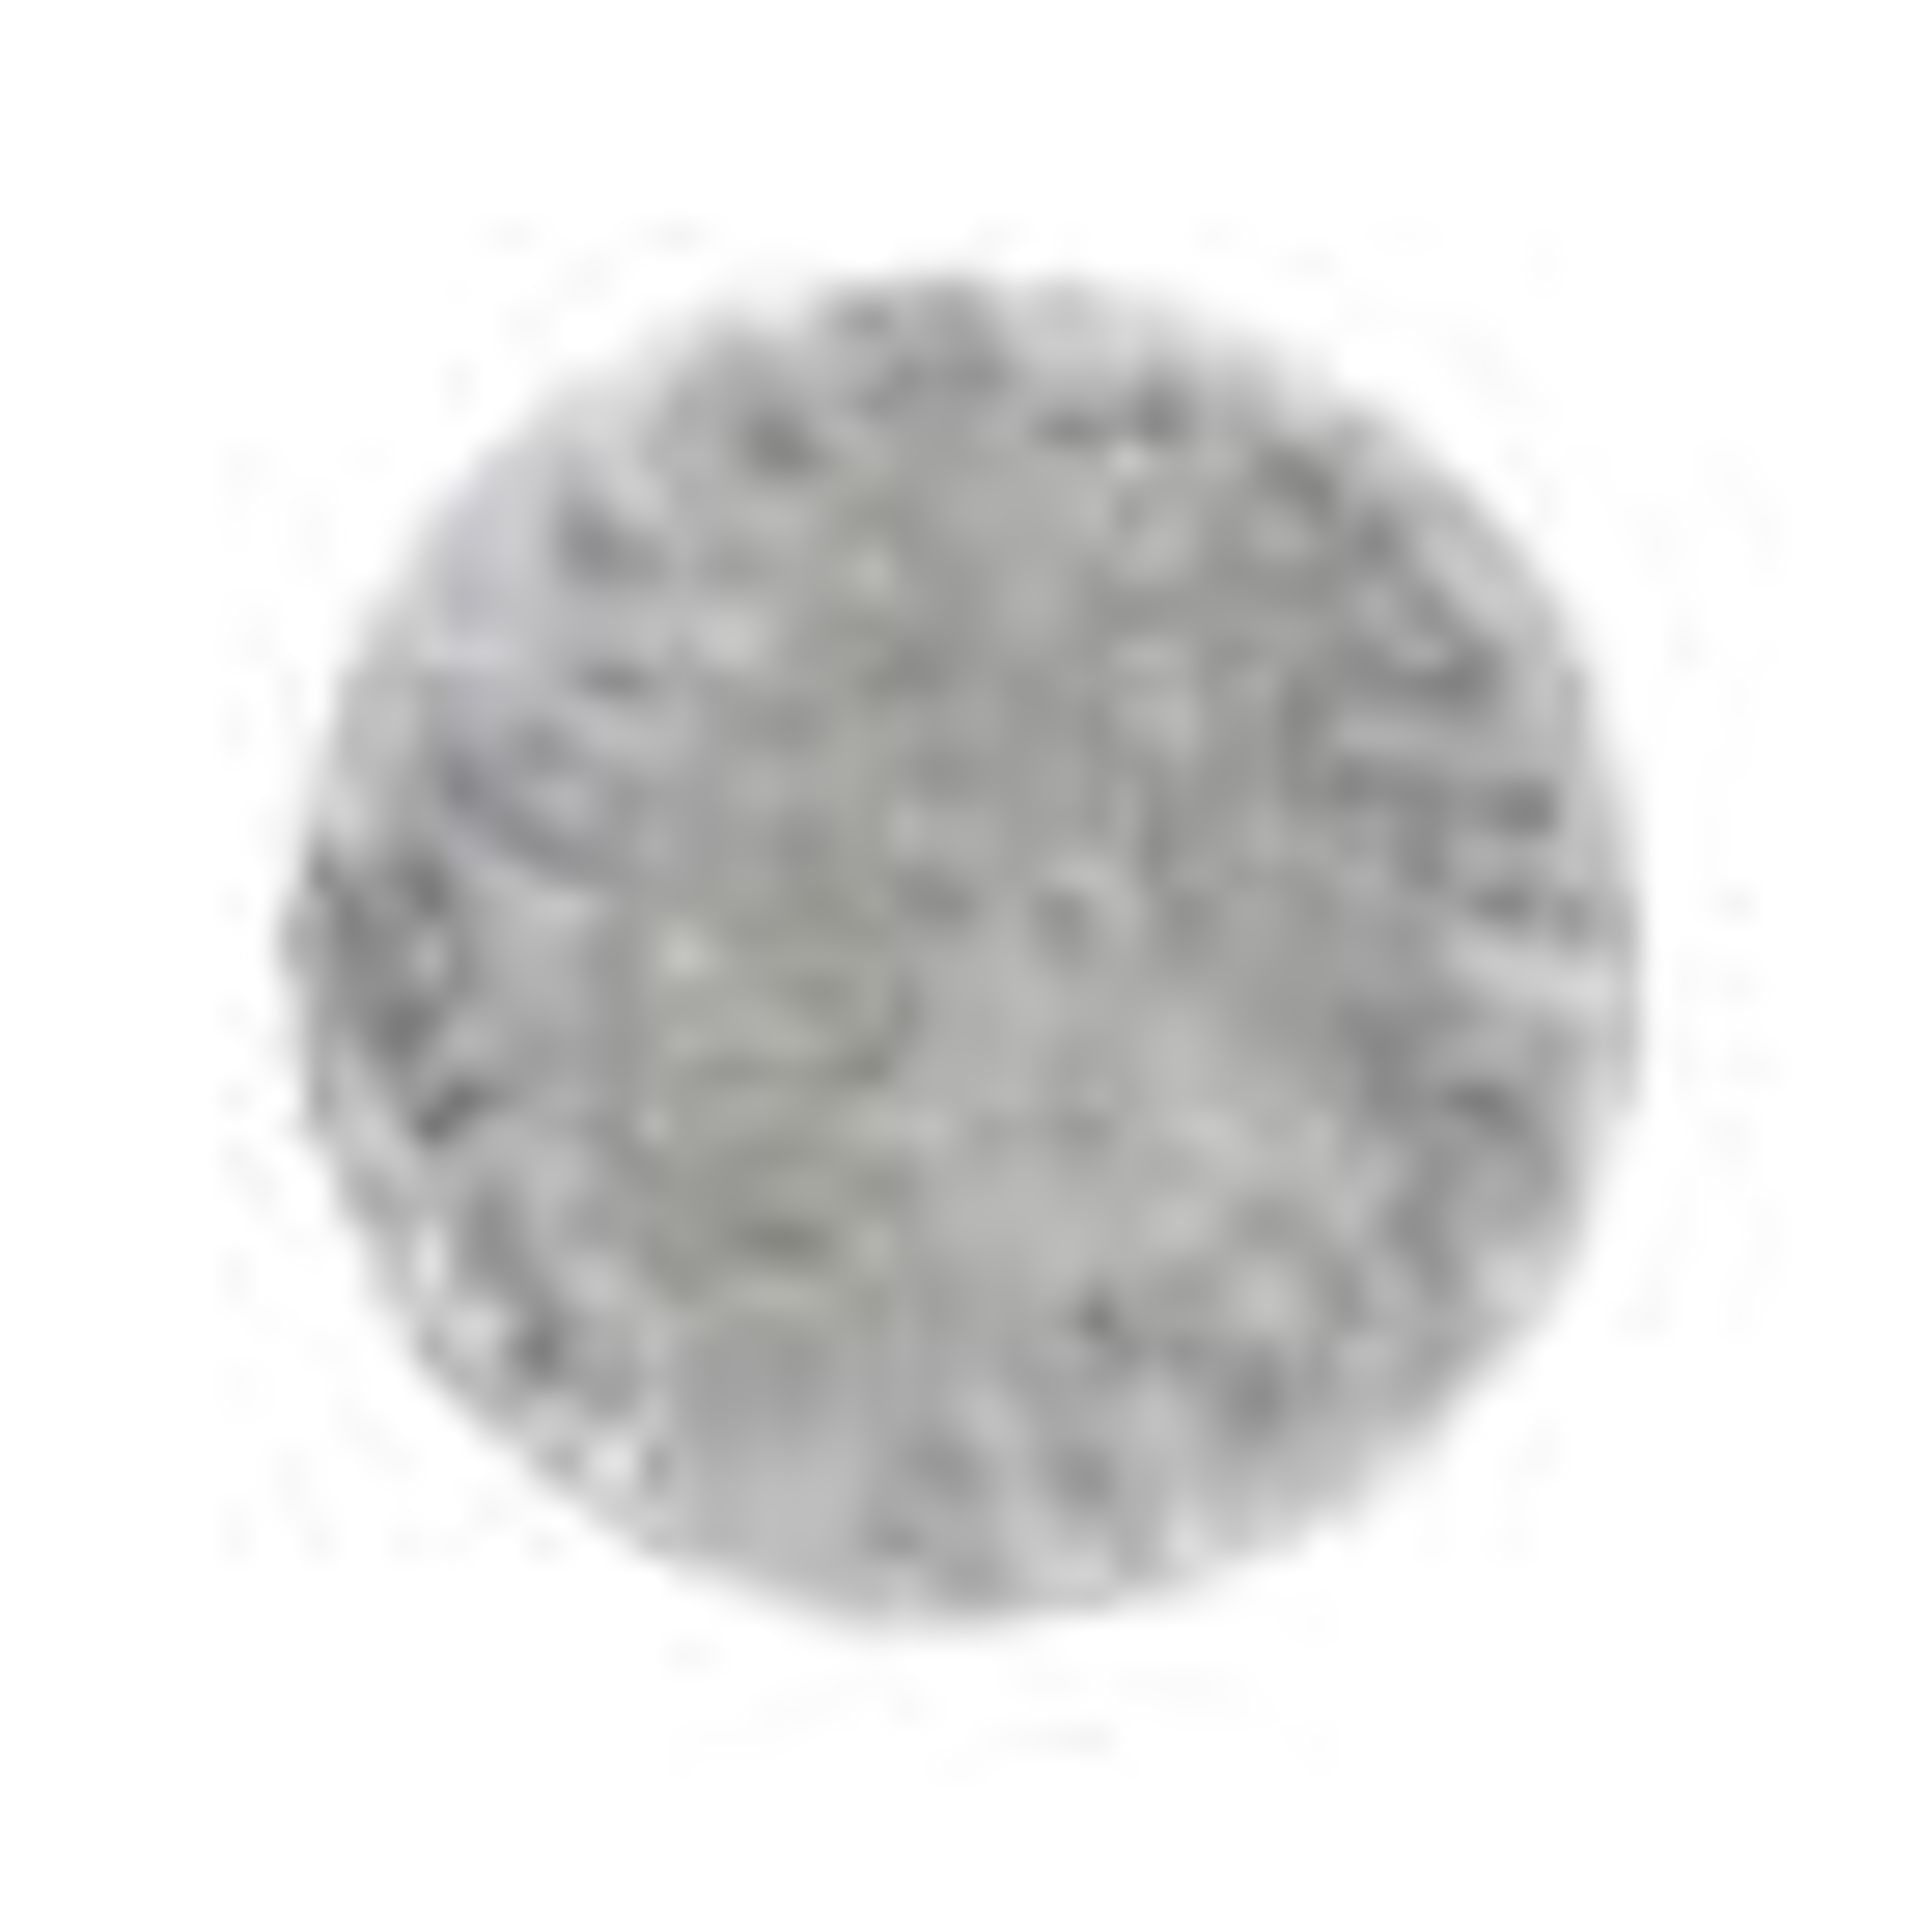 Pearl D040 Rug Jewel Shaggy Silver Circle 180X180cm RRP 159 About the Product(s) Pearl D040 Rug - Image 2 of 3